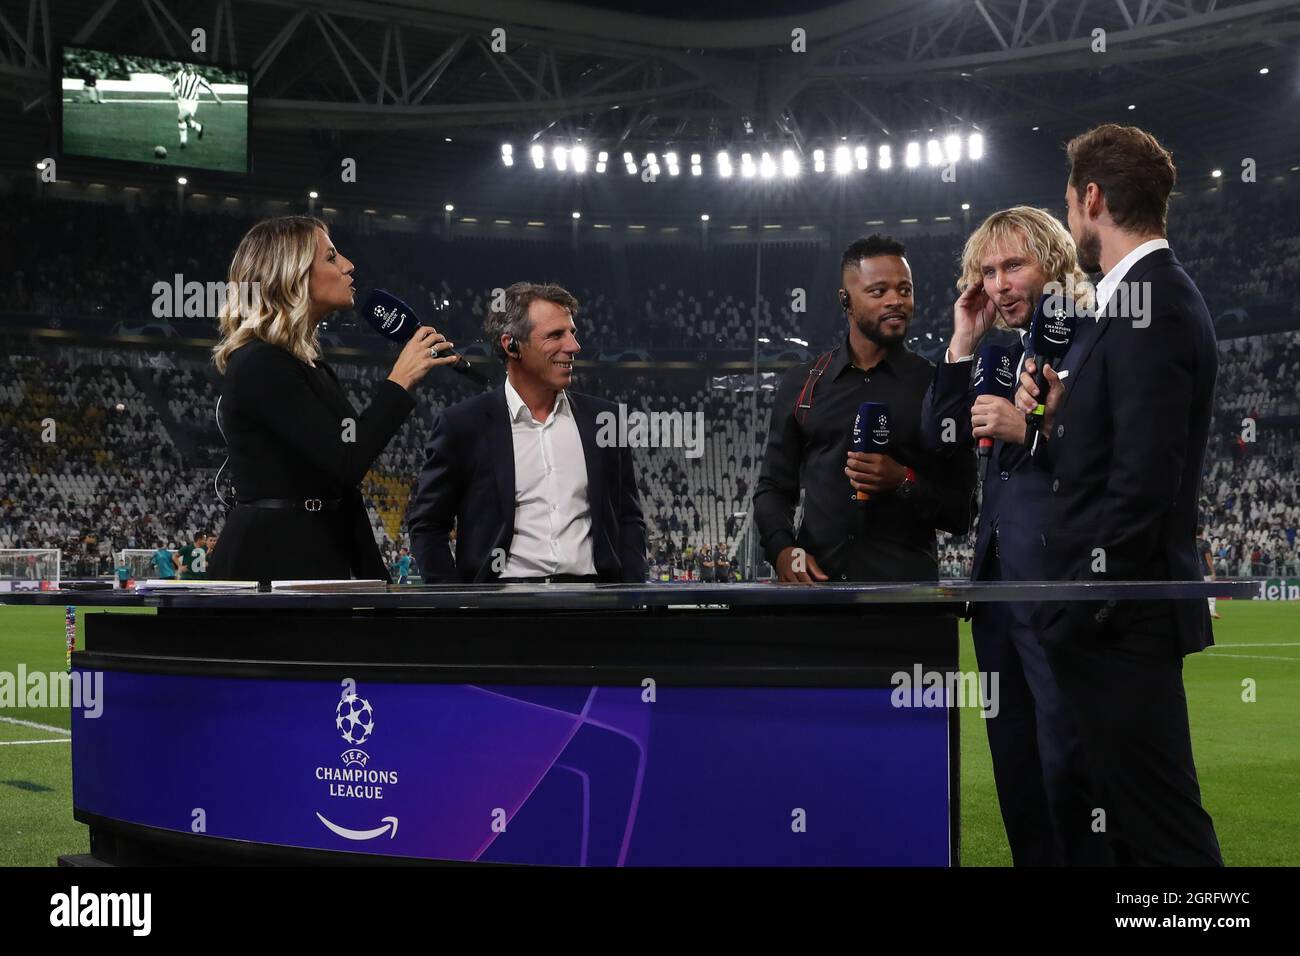 Turin, Italy. 29th Sep, 2021. Pavel Nedved Vice President of Juventus (  second from right ) joins the Amazon Prime commentary team ( L to R ):  Giulia Mizzoni, Gianfranco Zola, Patrice